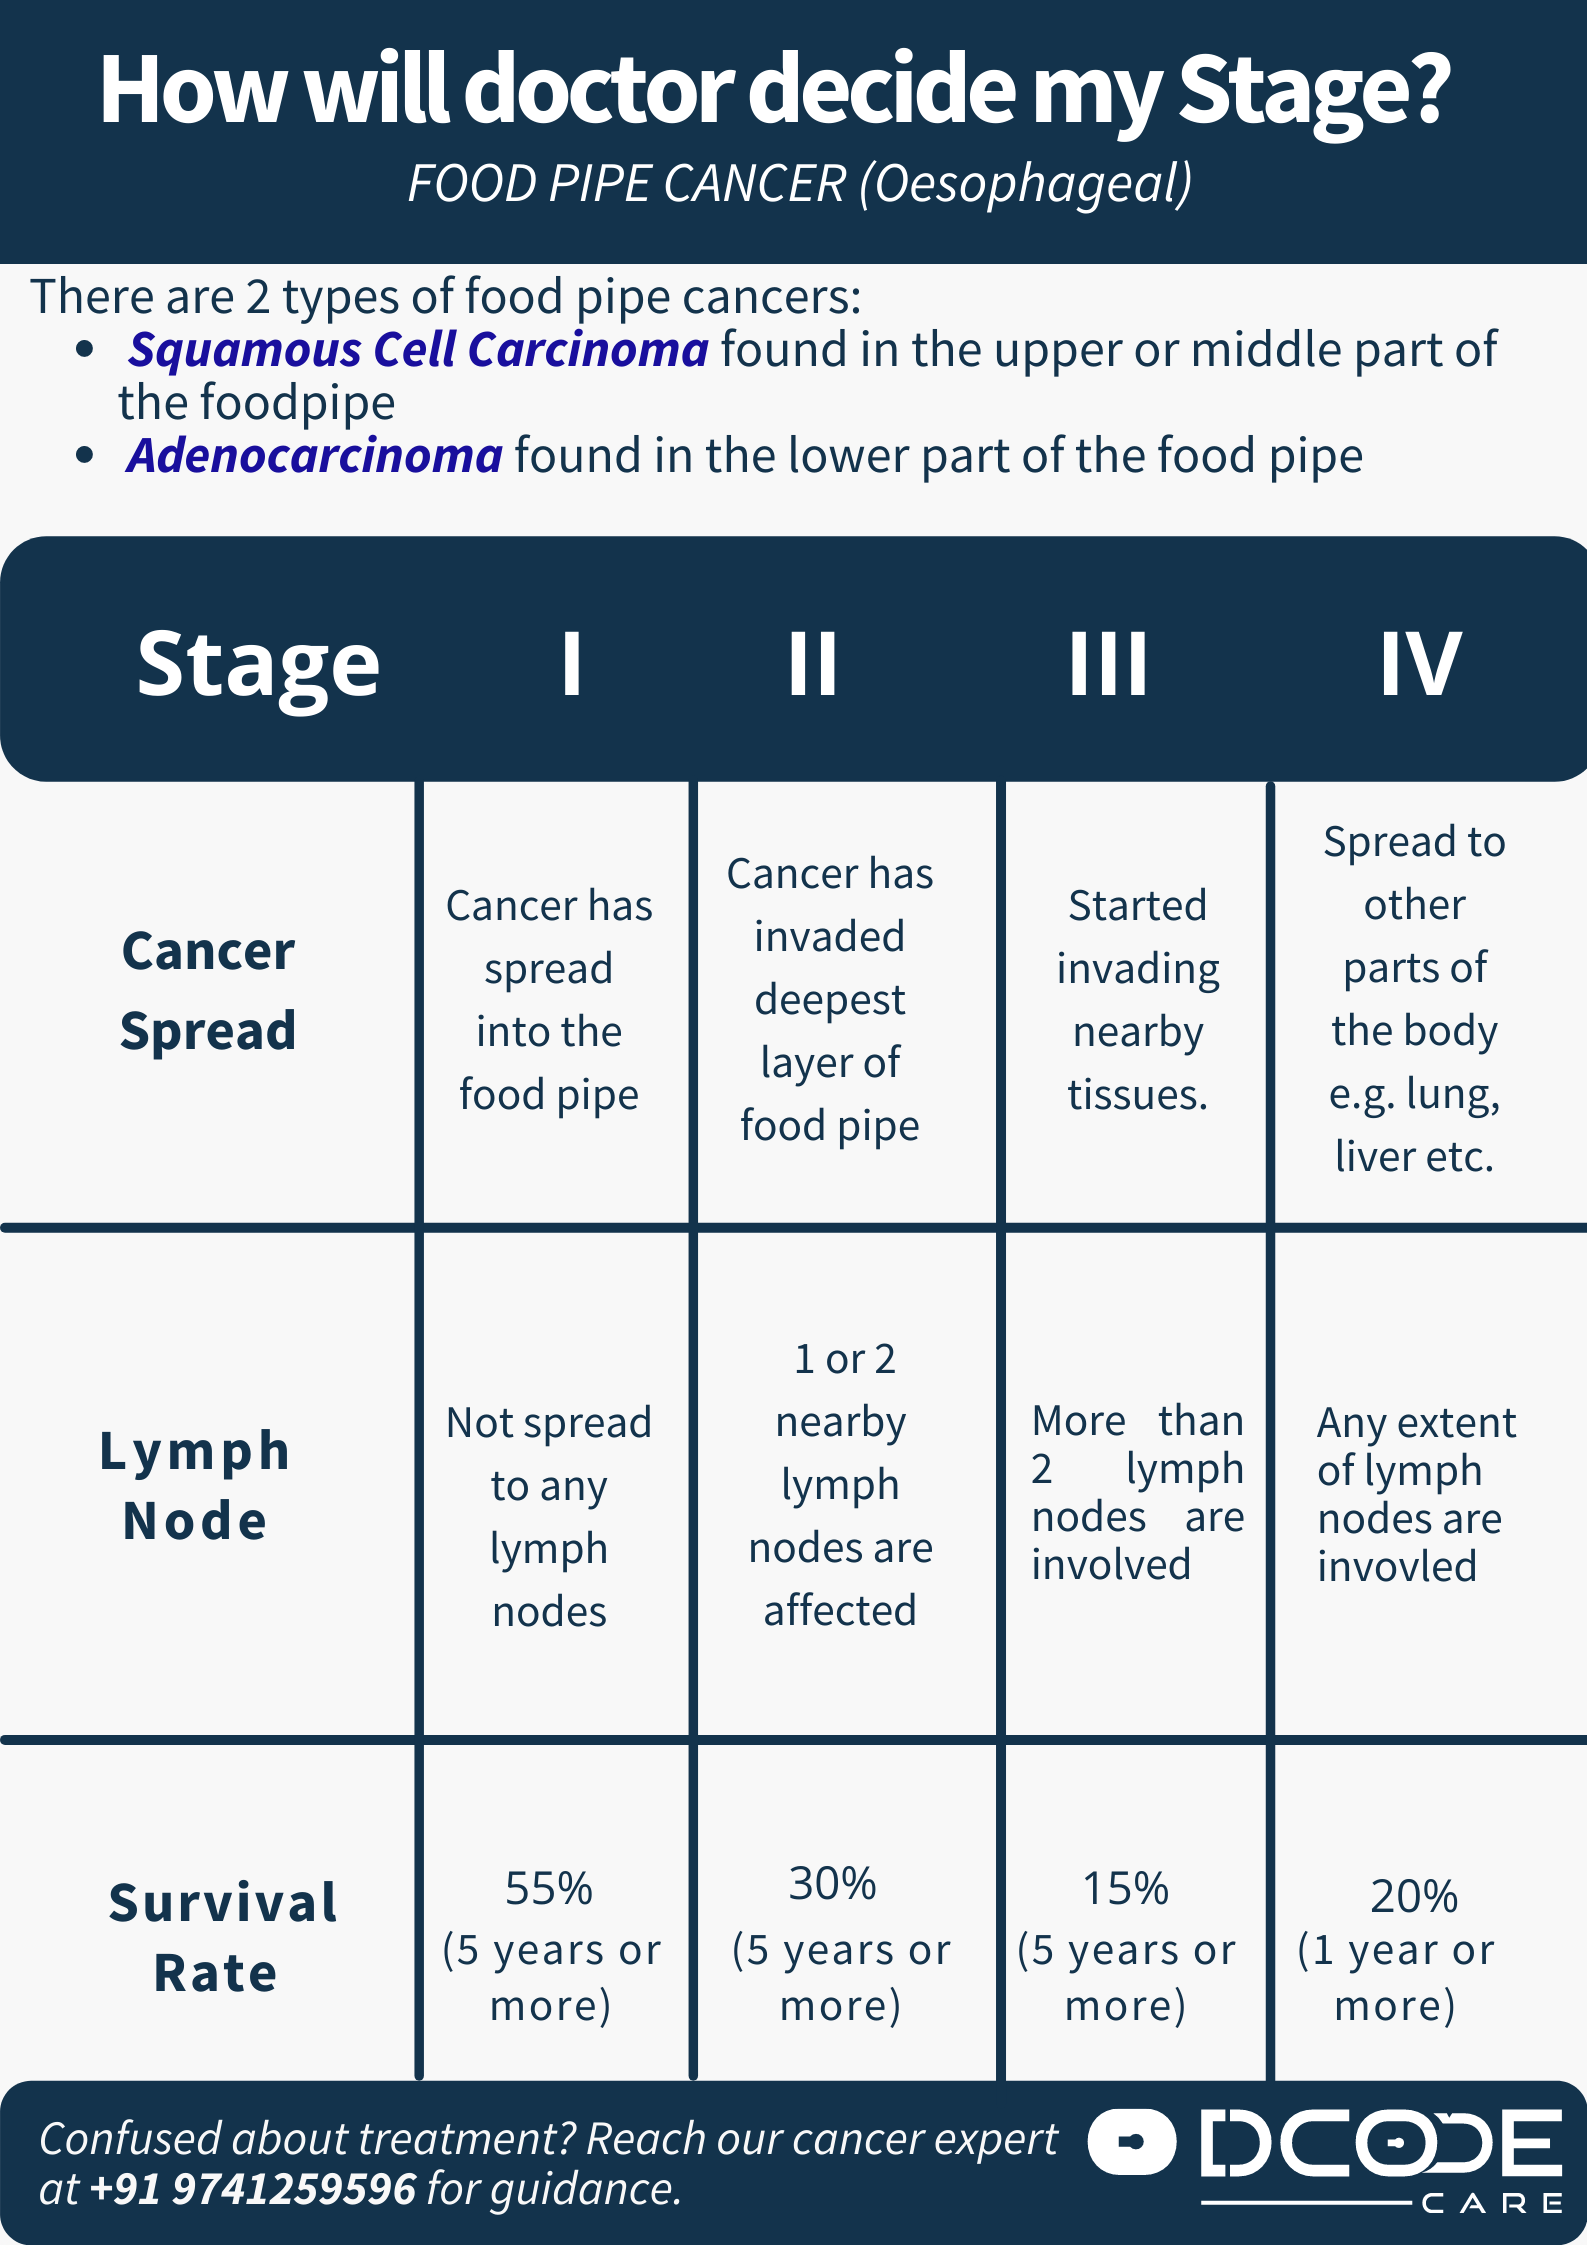 How will doctor decide my stage? Food pipe cancer (Oesophageal cancer)